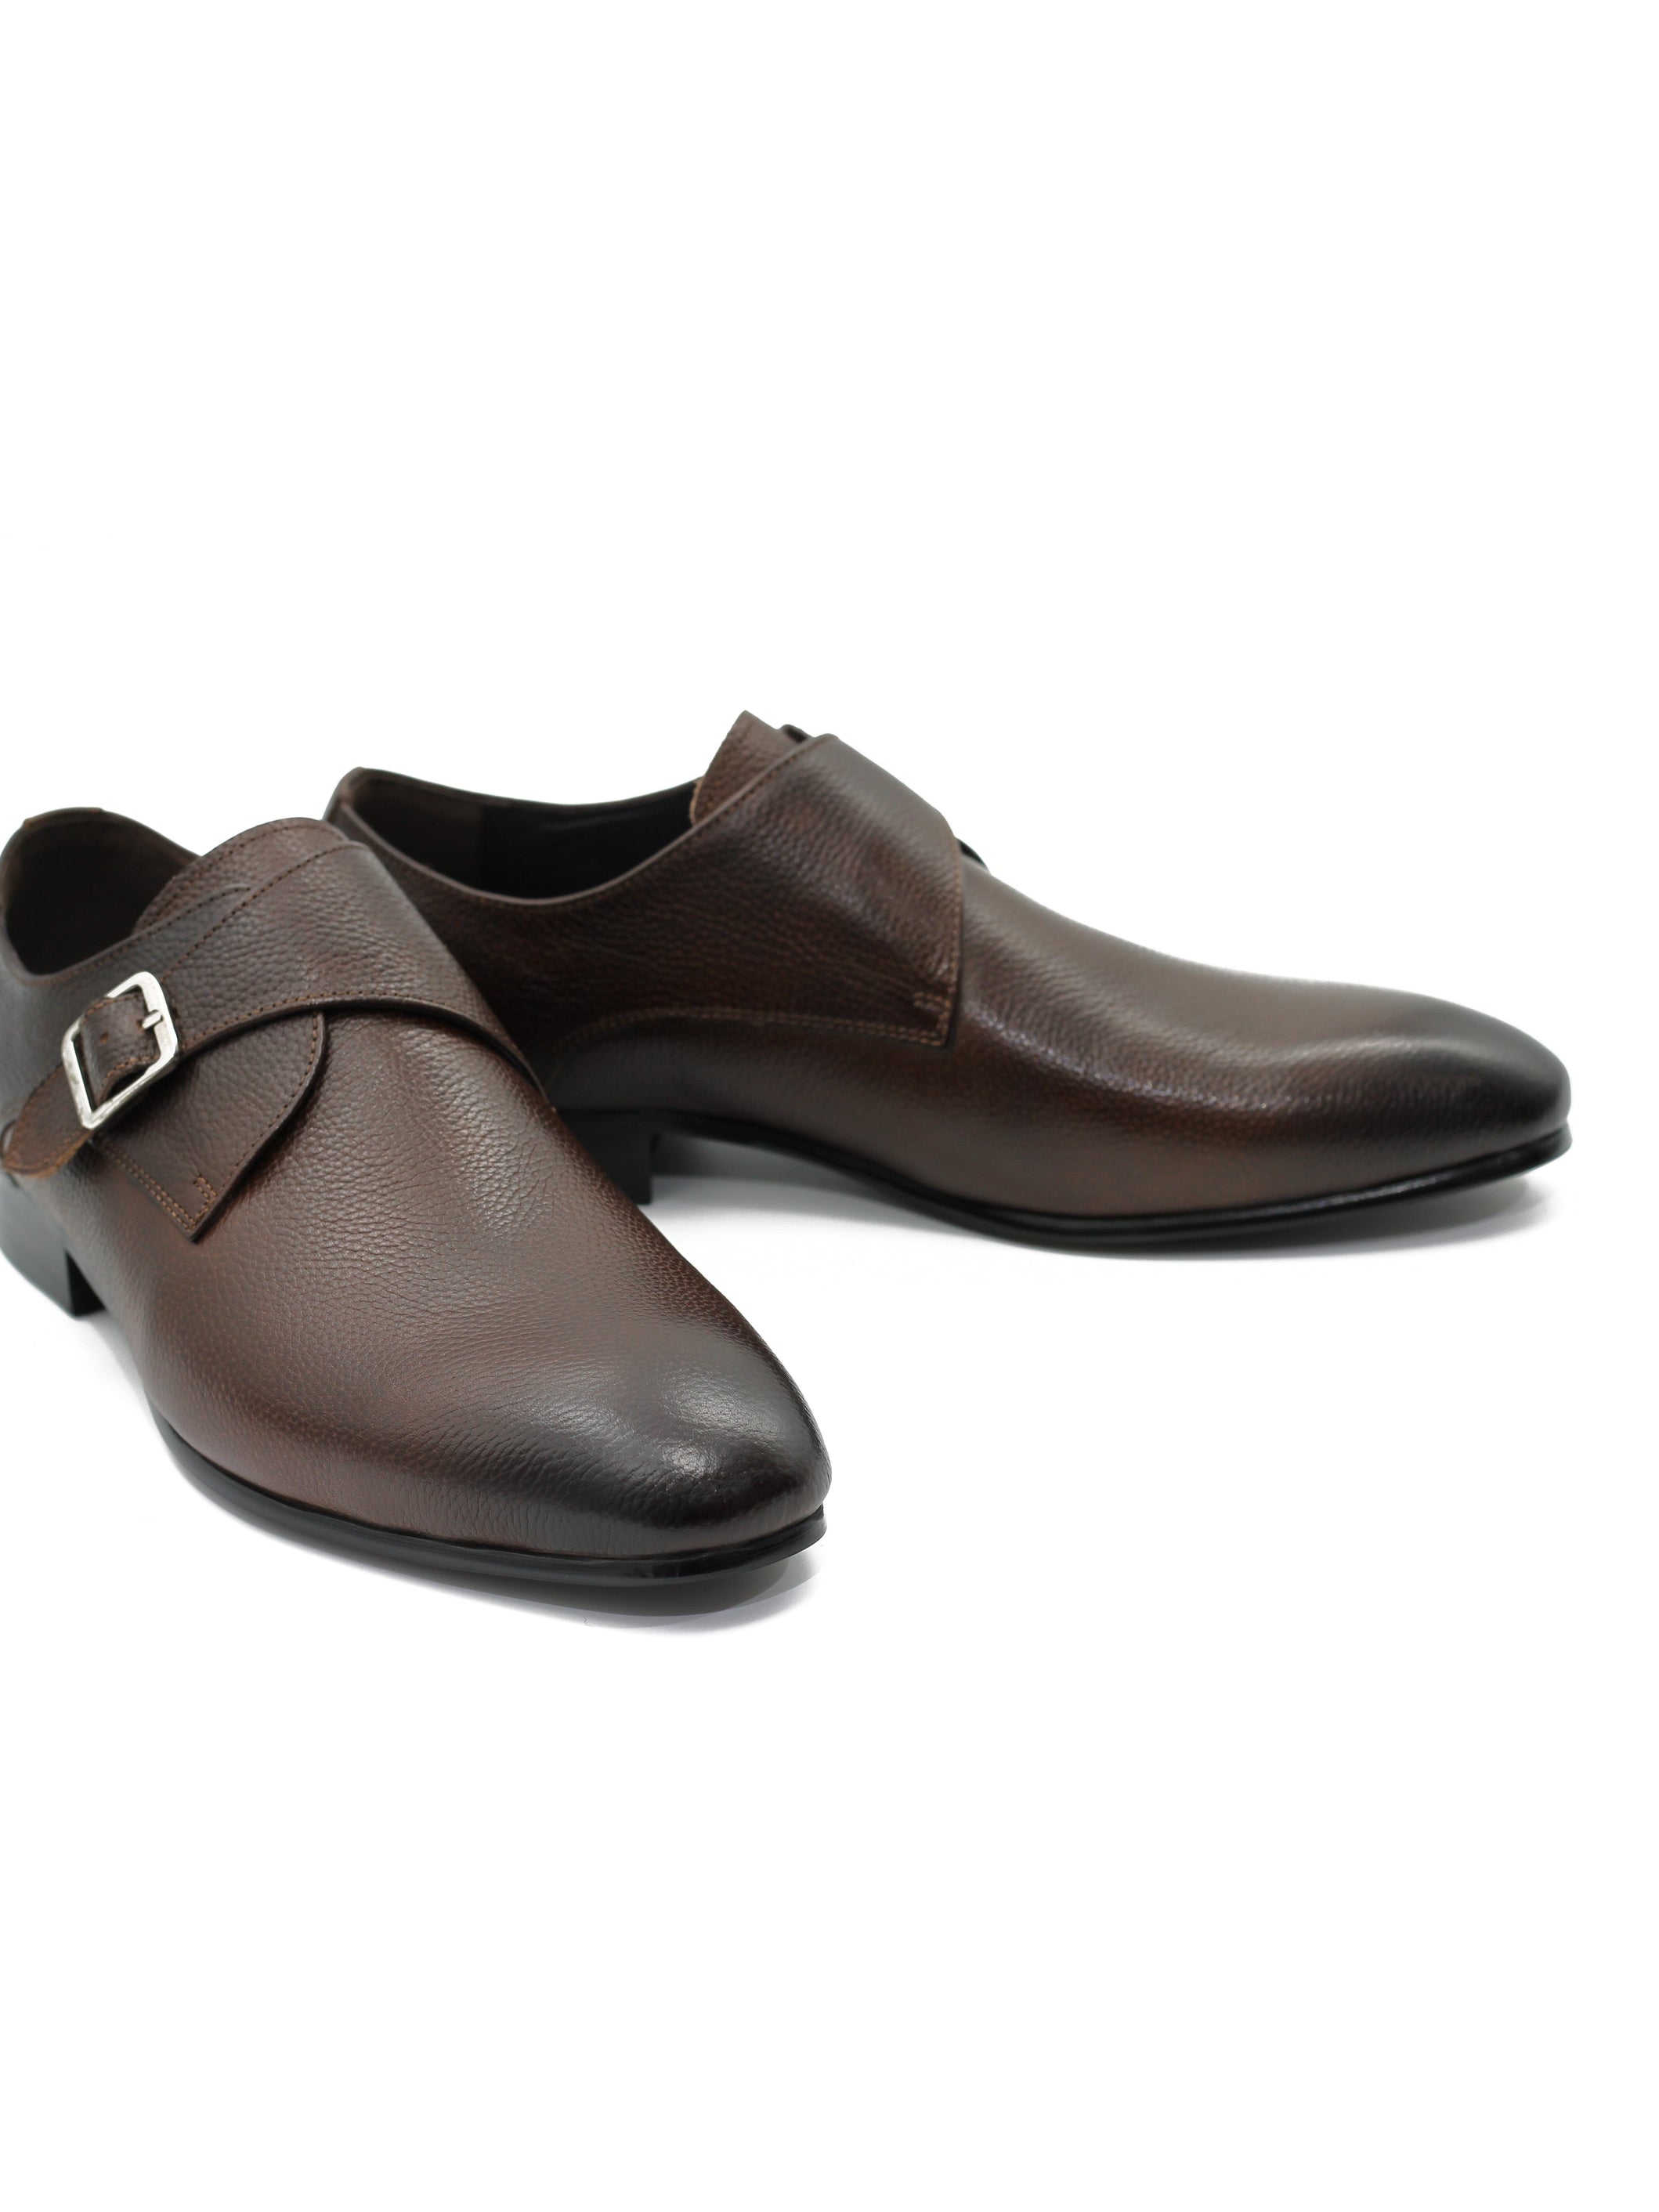 BROWN GRAIN LEATHER MONK SHOES